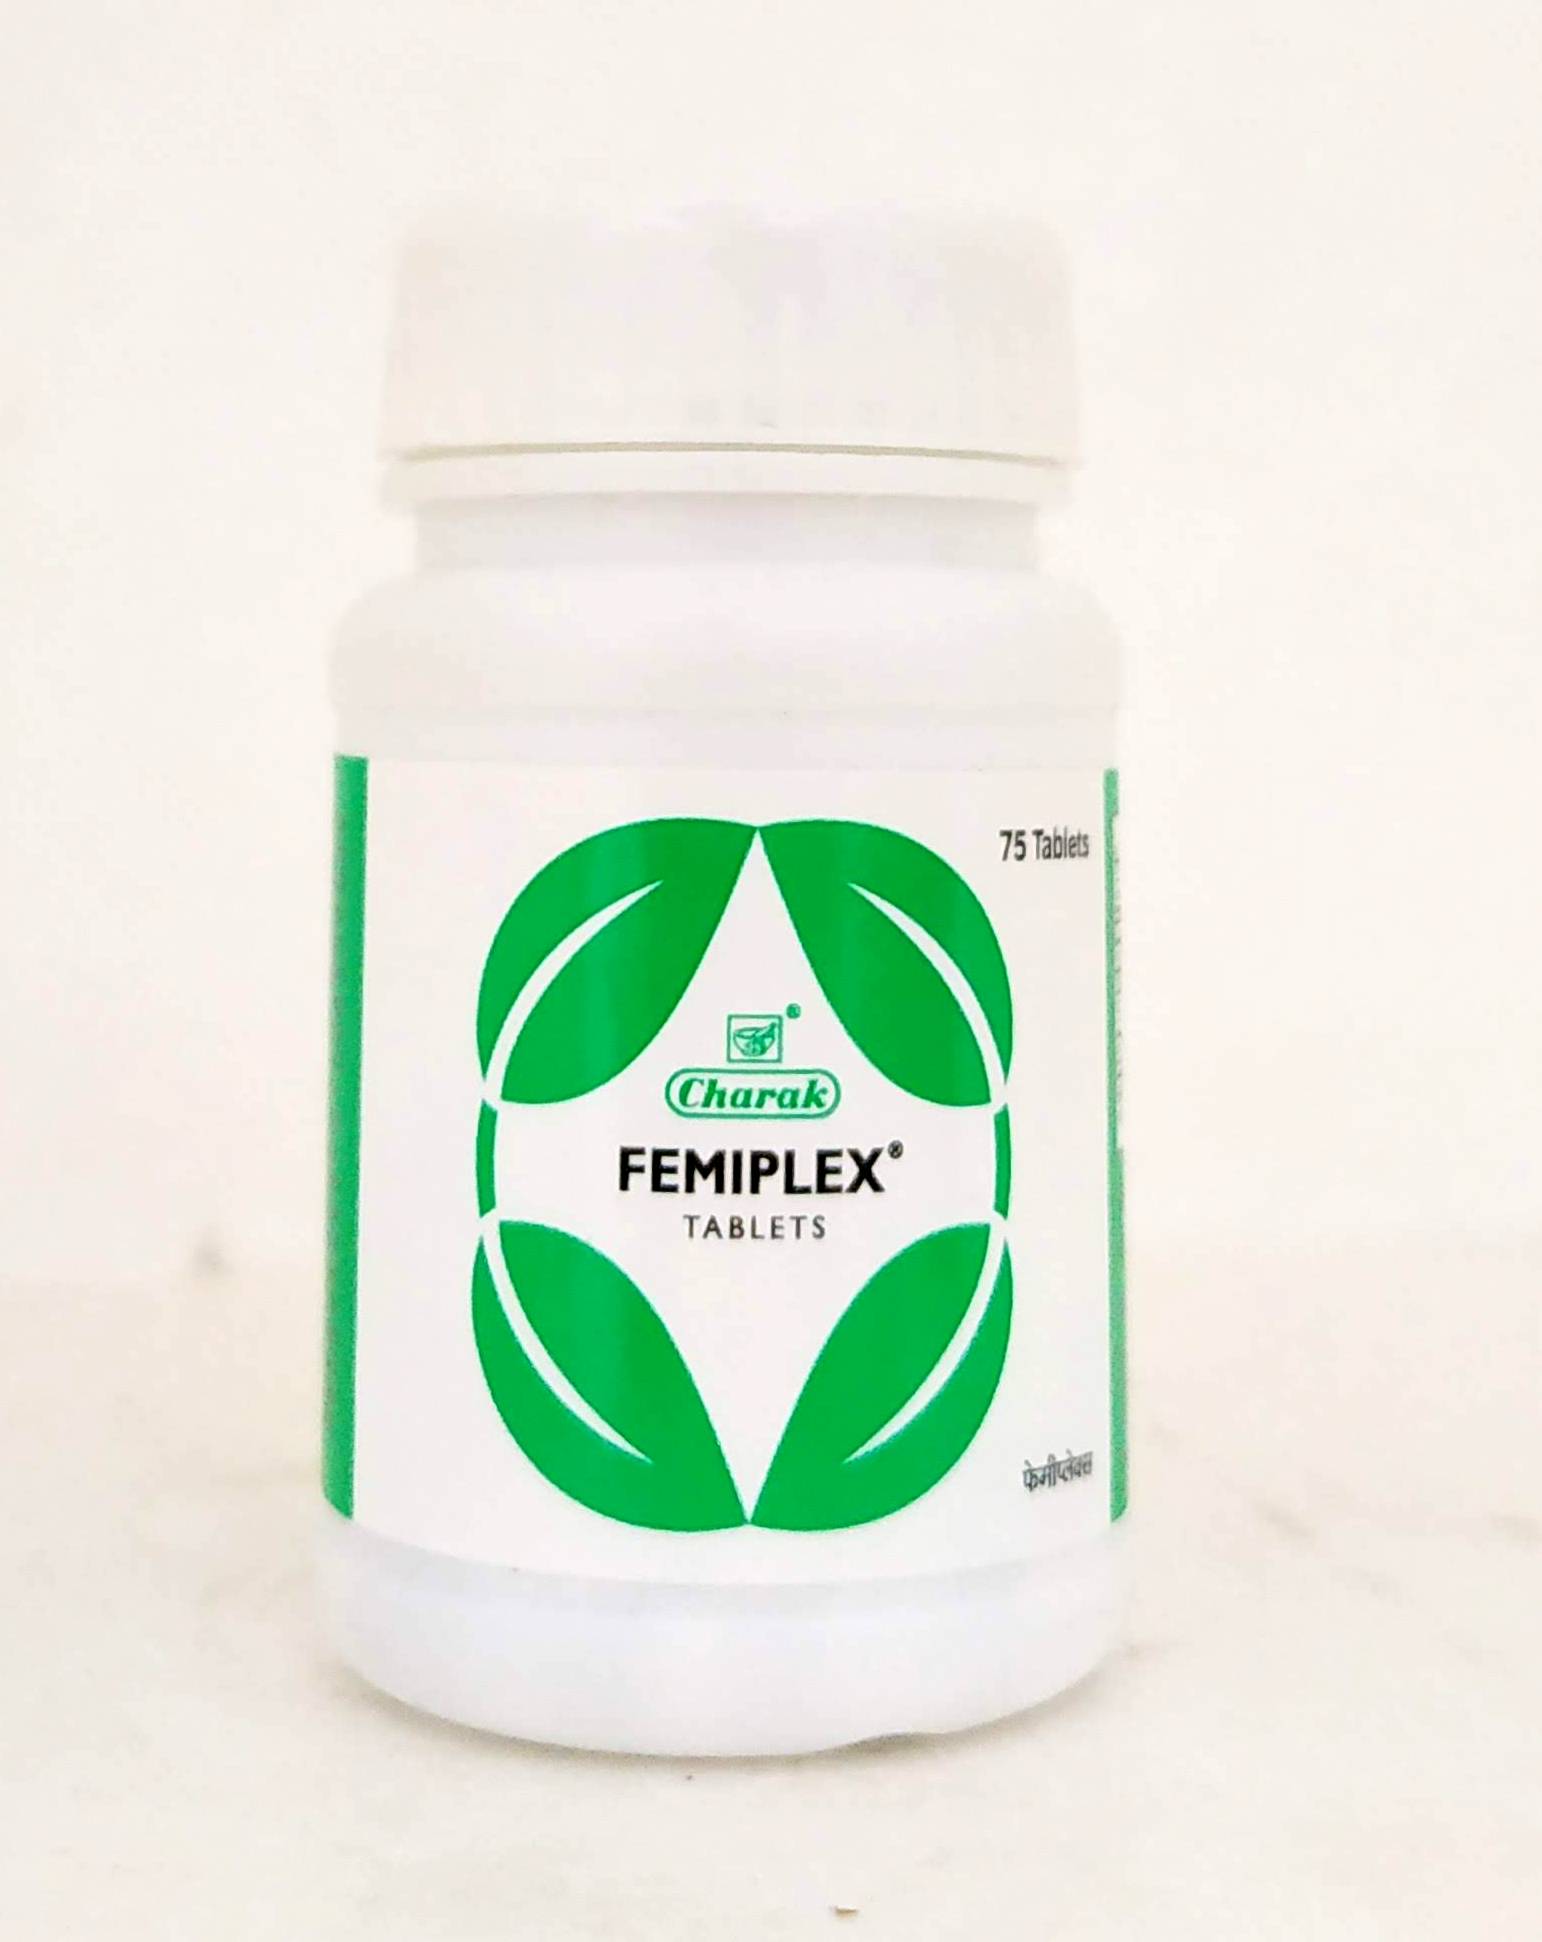 Shop Femiplex Tablets - 75Tablets at price 125.00 from Charak Online - Ayush Care